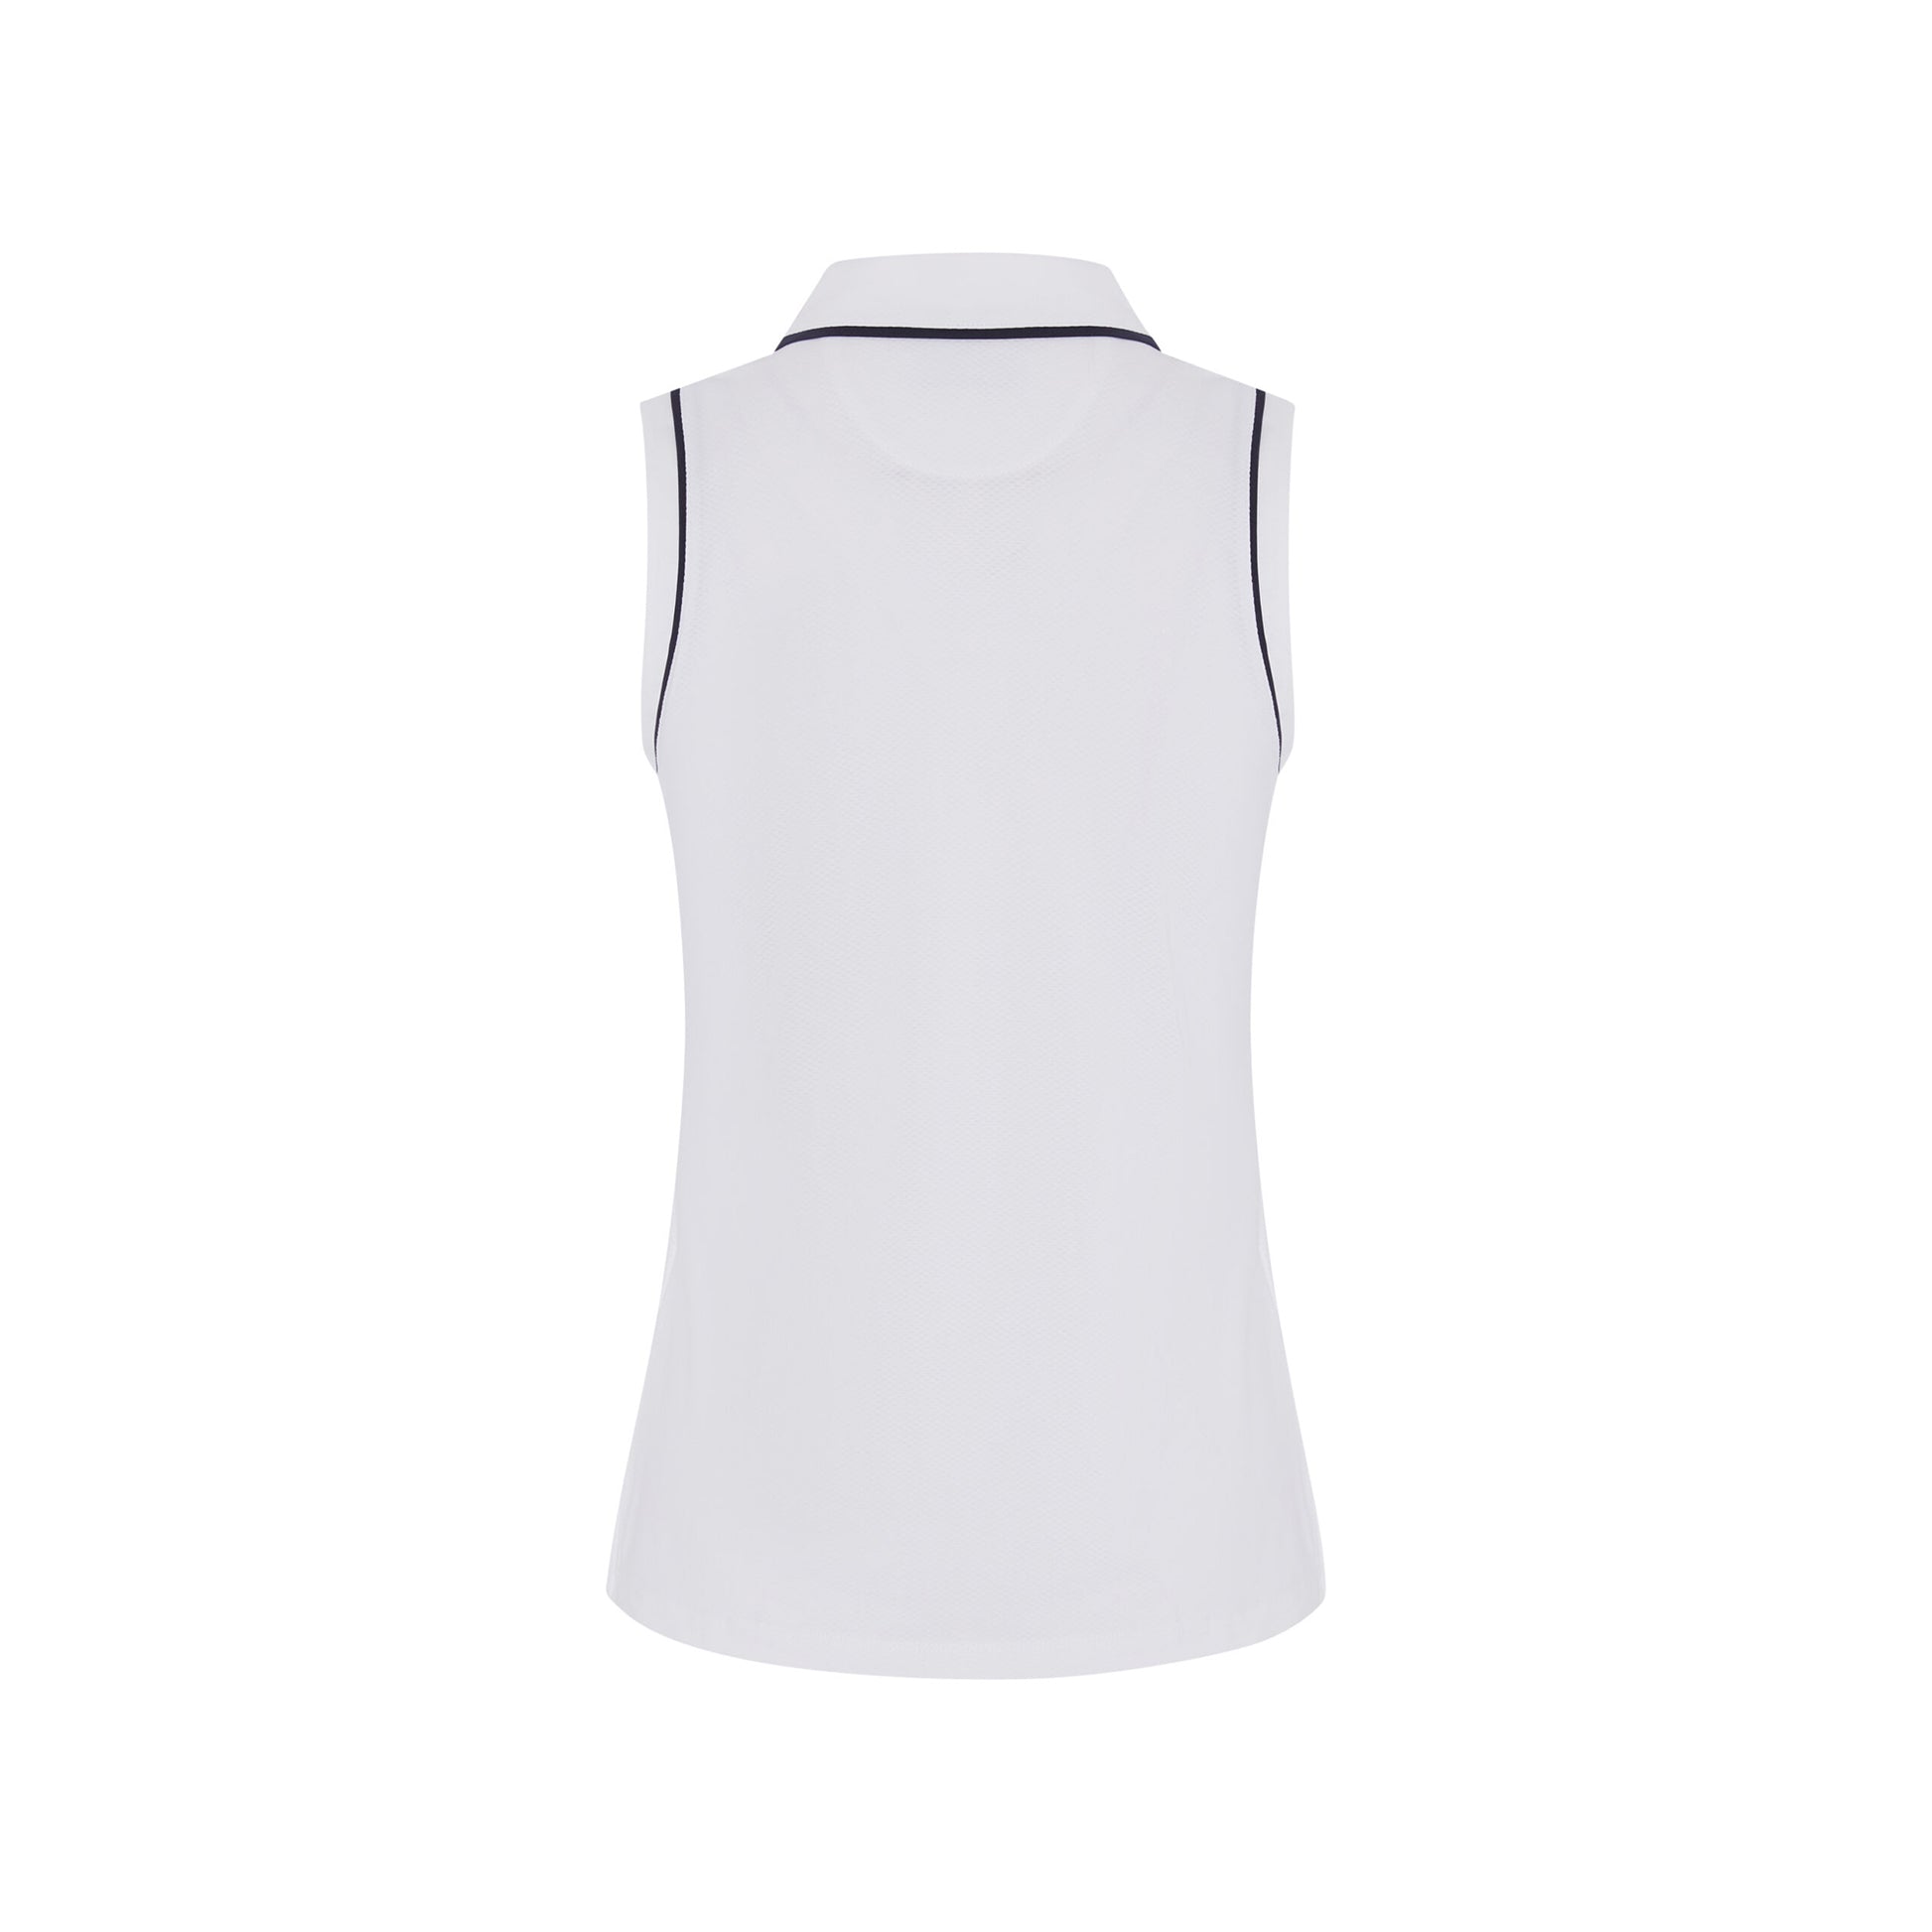 Original Penguin Women's Sleeveless Polo in Bright White with Contrast Piping